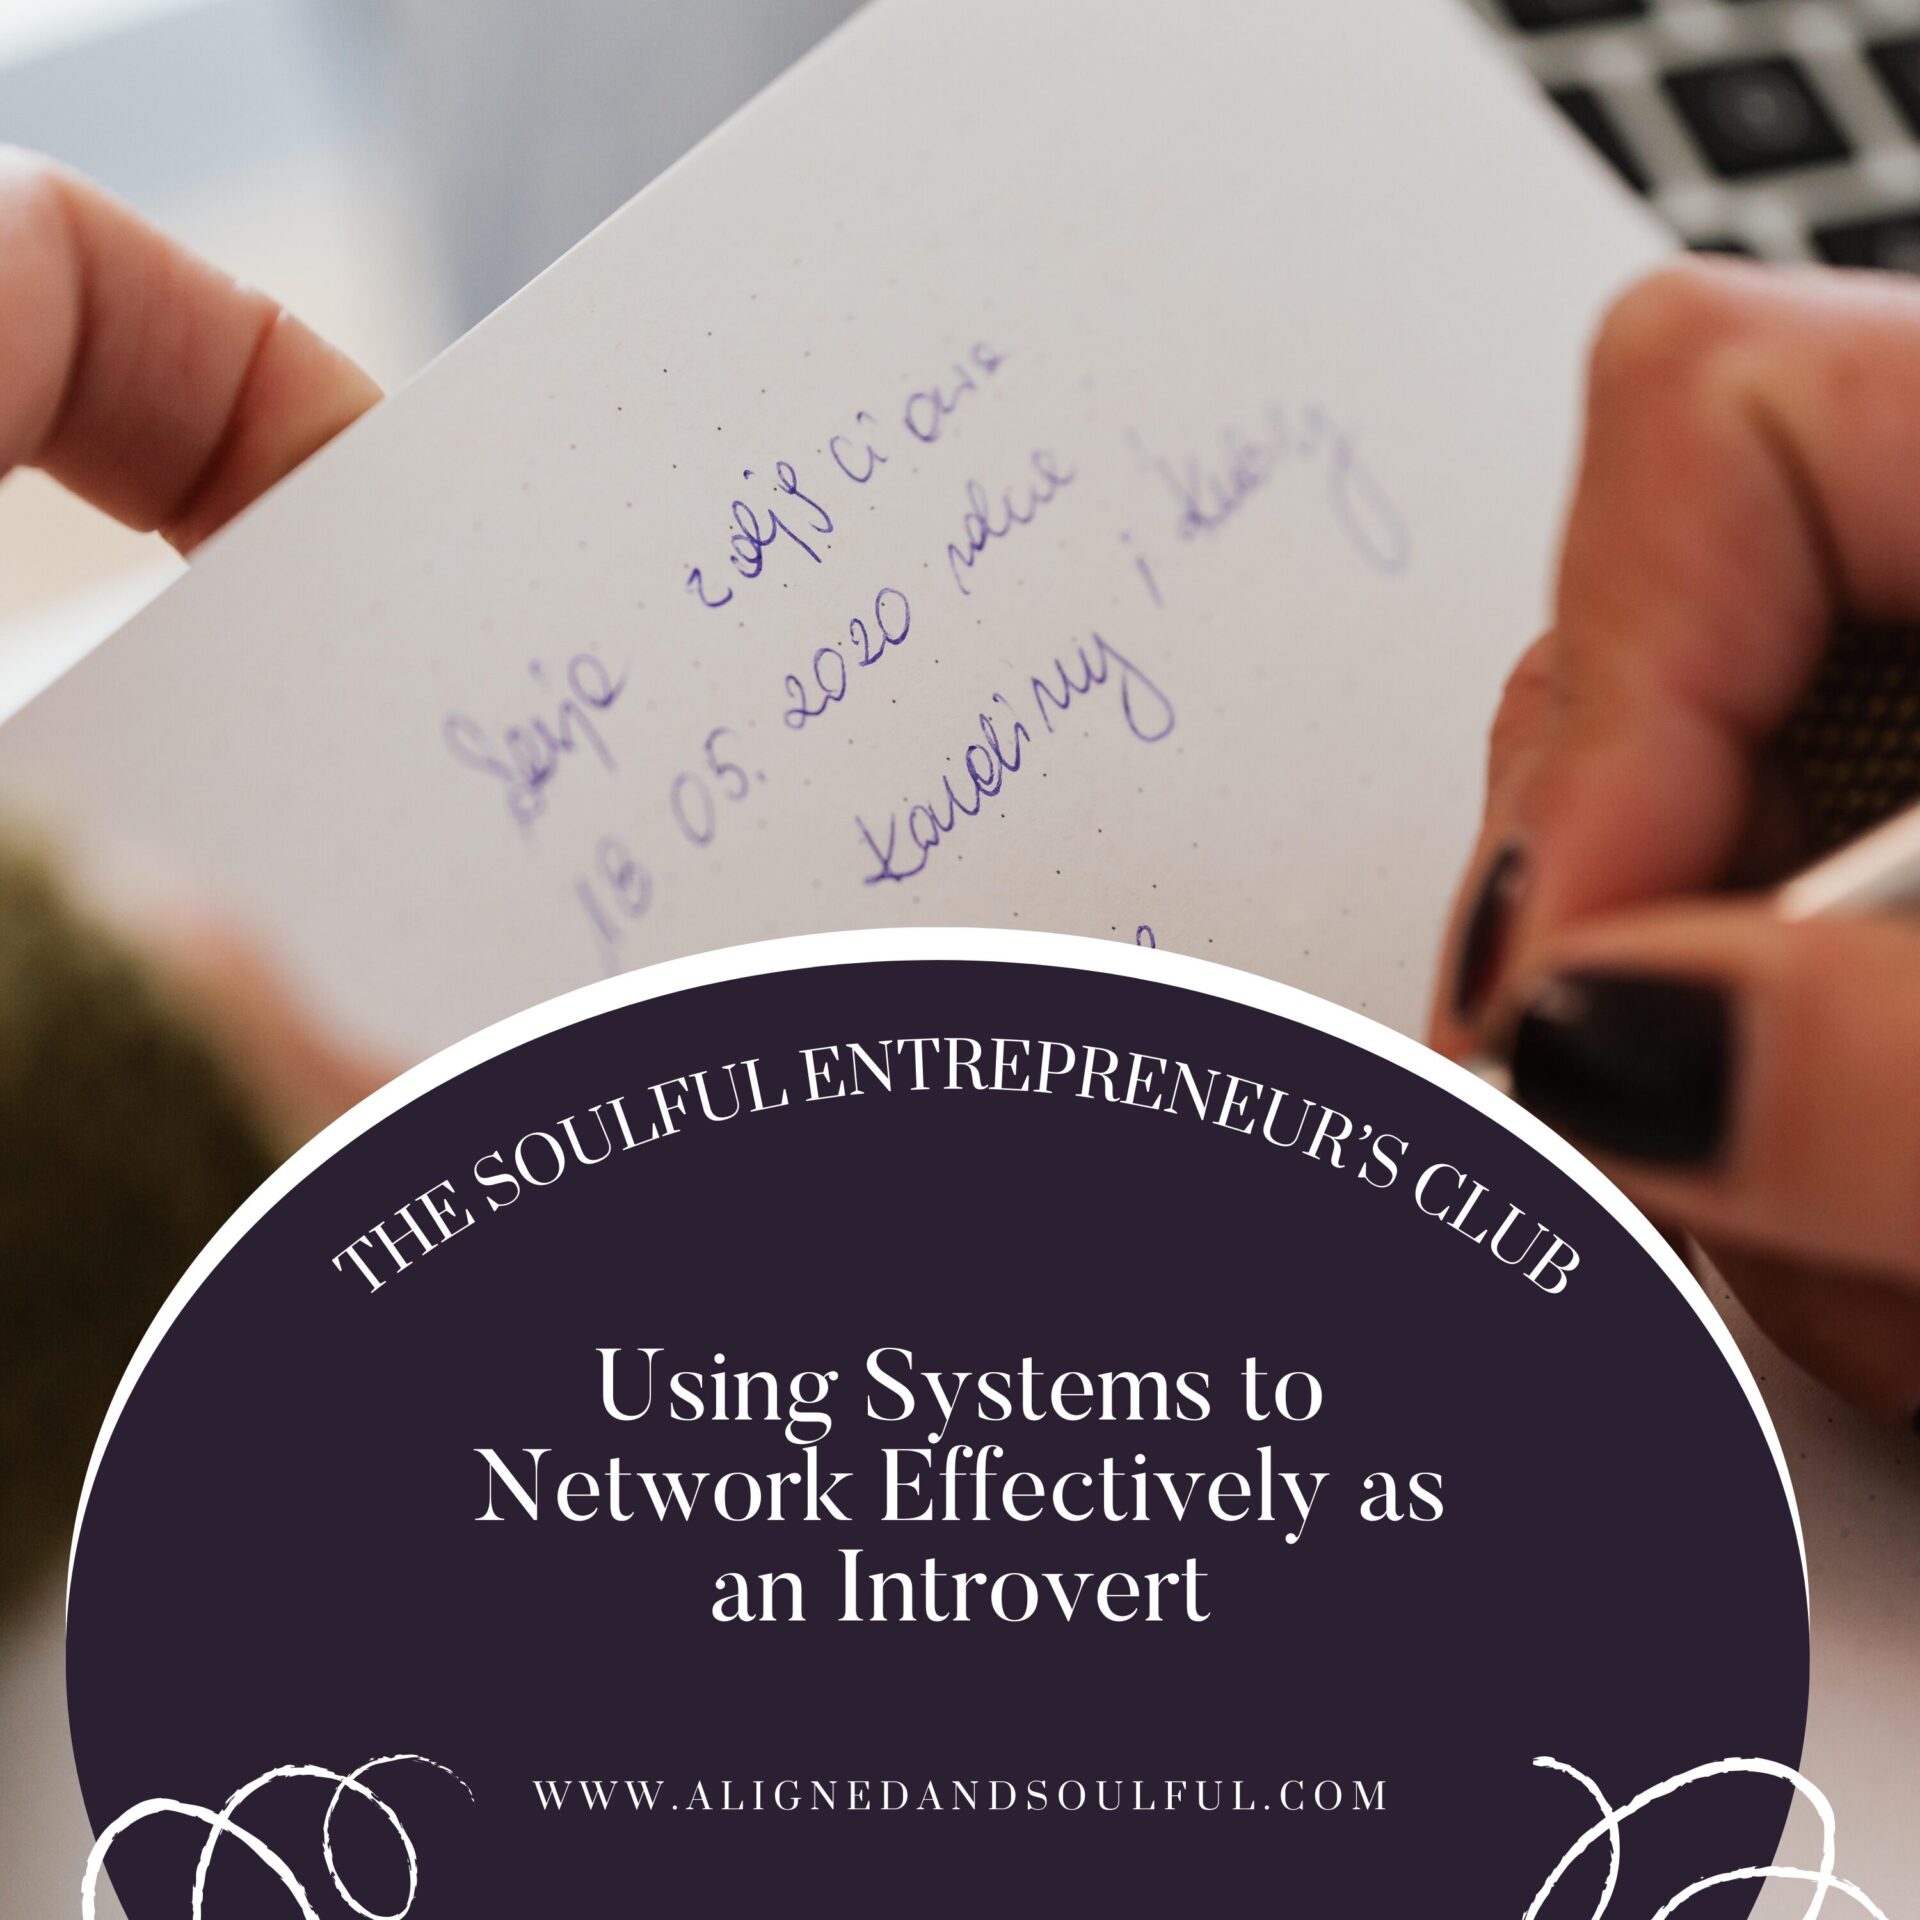 Using Systems to Network Effectively as an Introvert